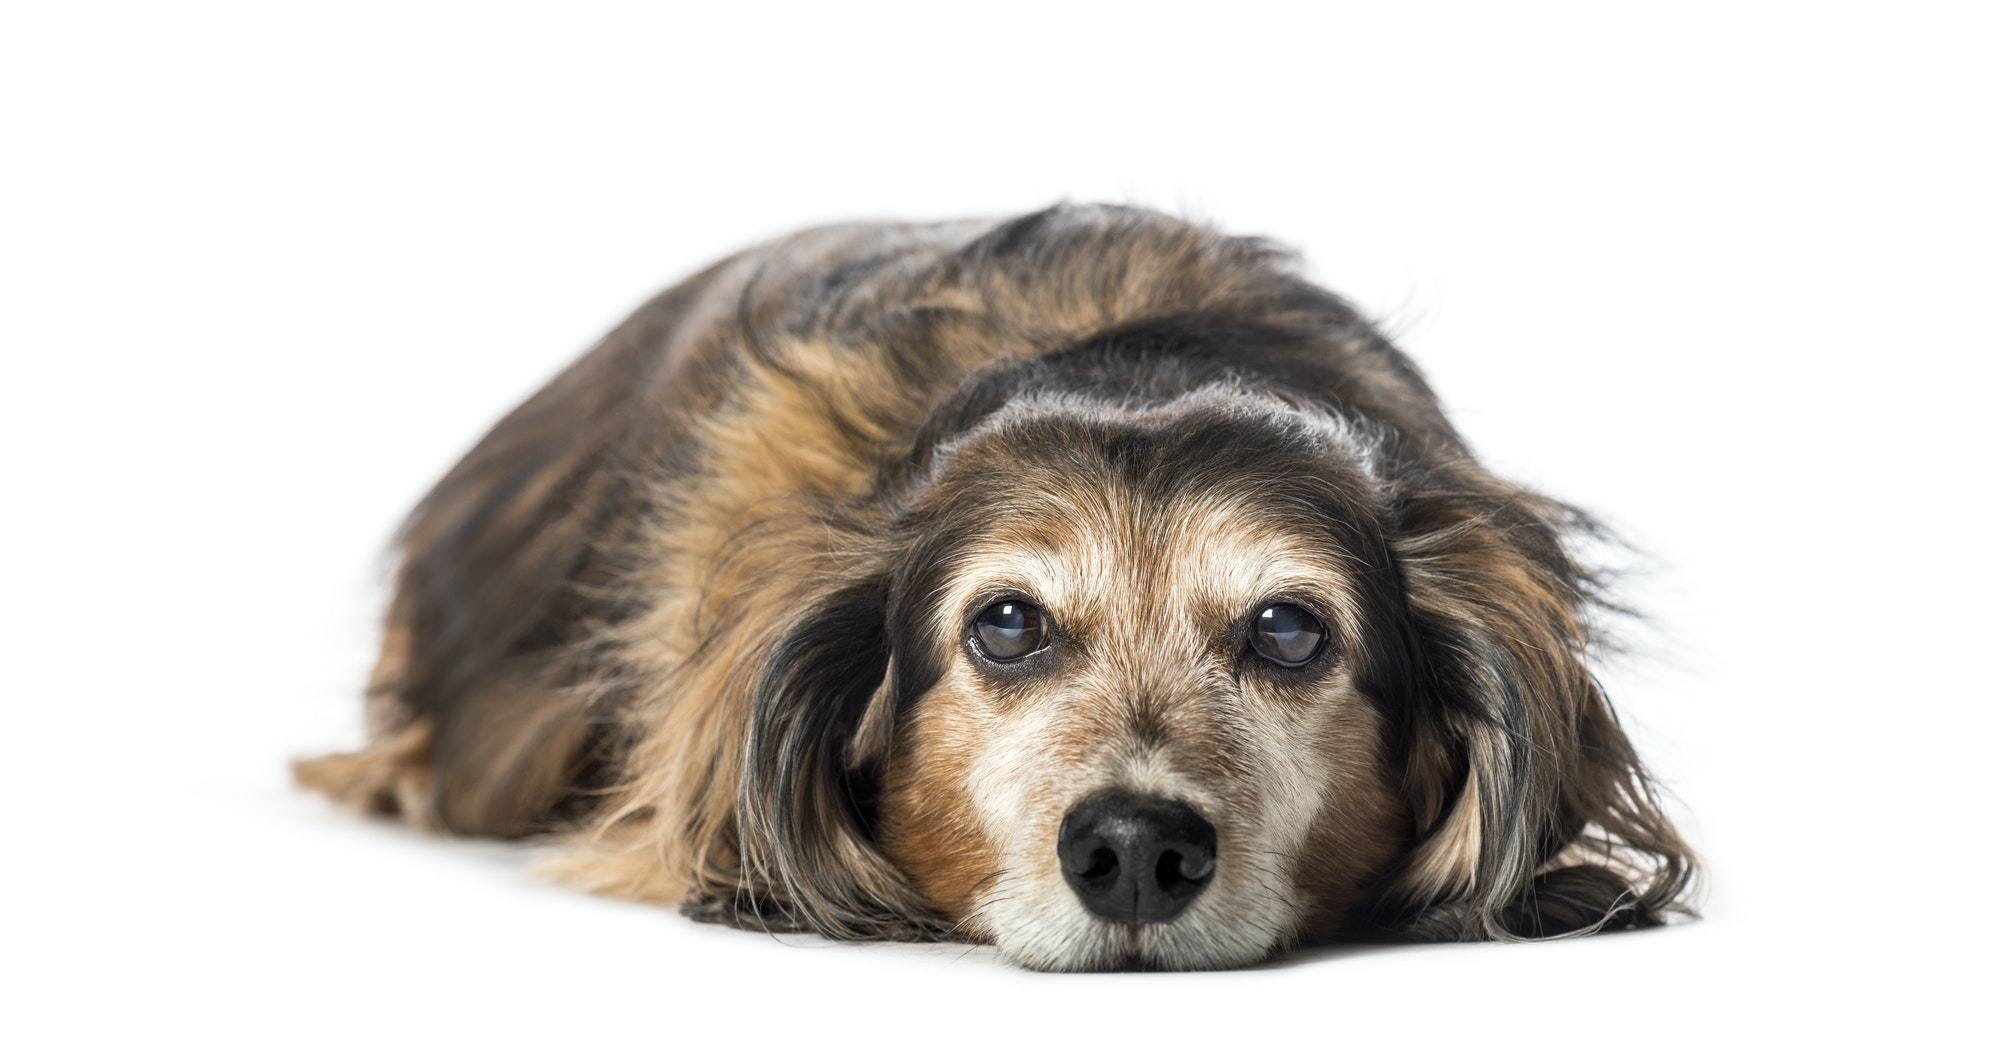 Old Dachshund ,badger dog, sausage dog, wiener dog lying in front of white background